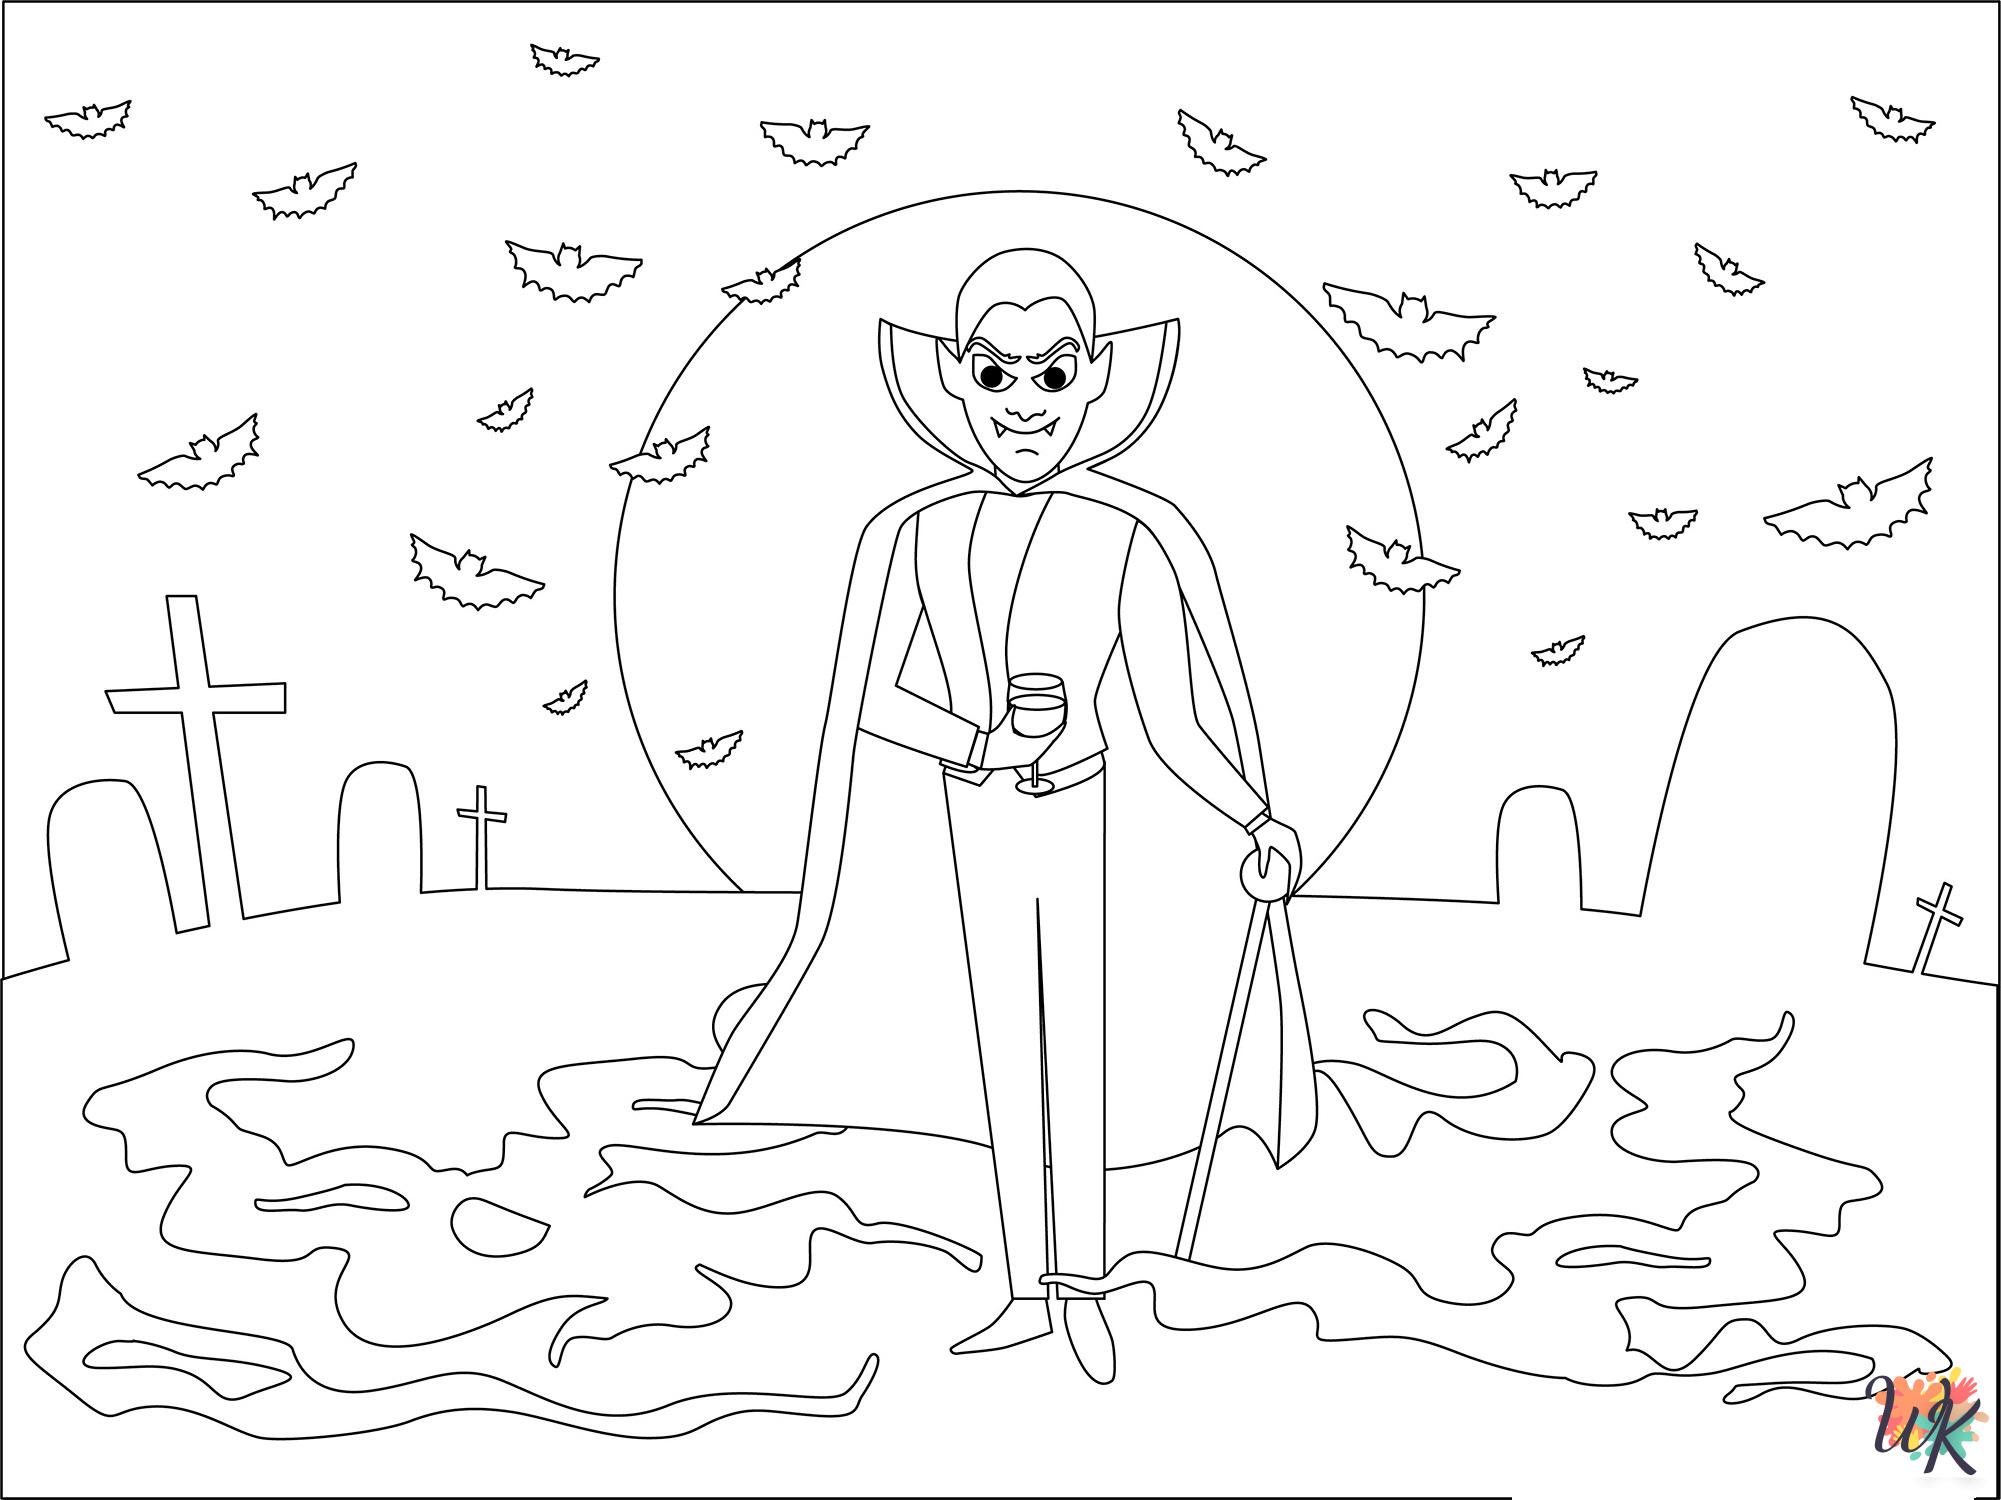 Dracula coloring pages for kids